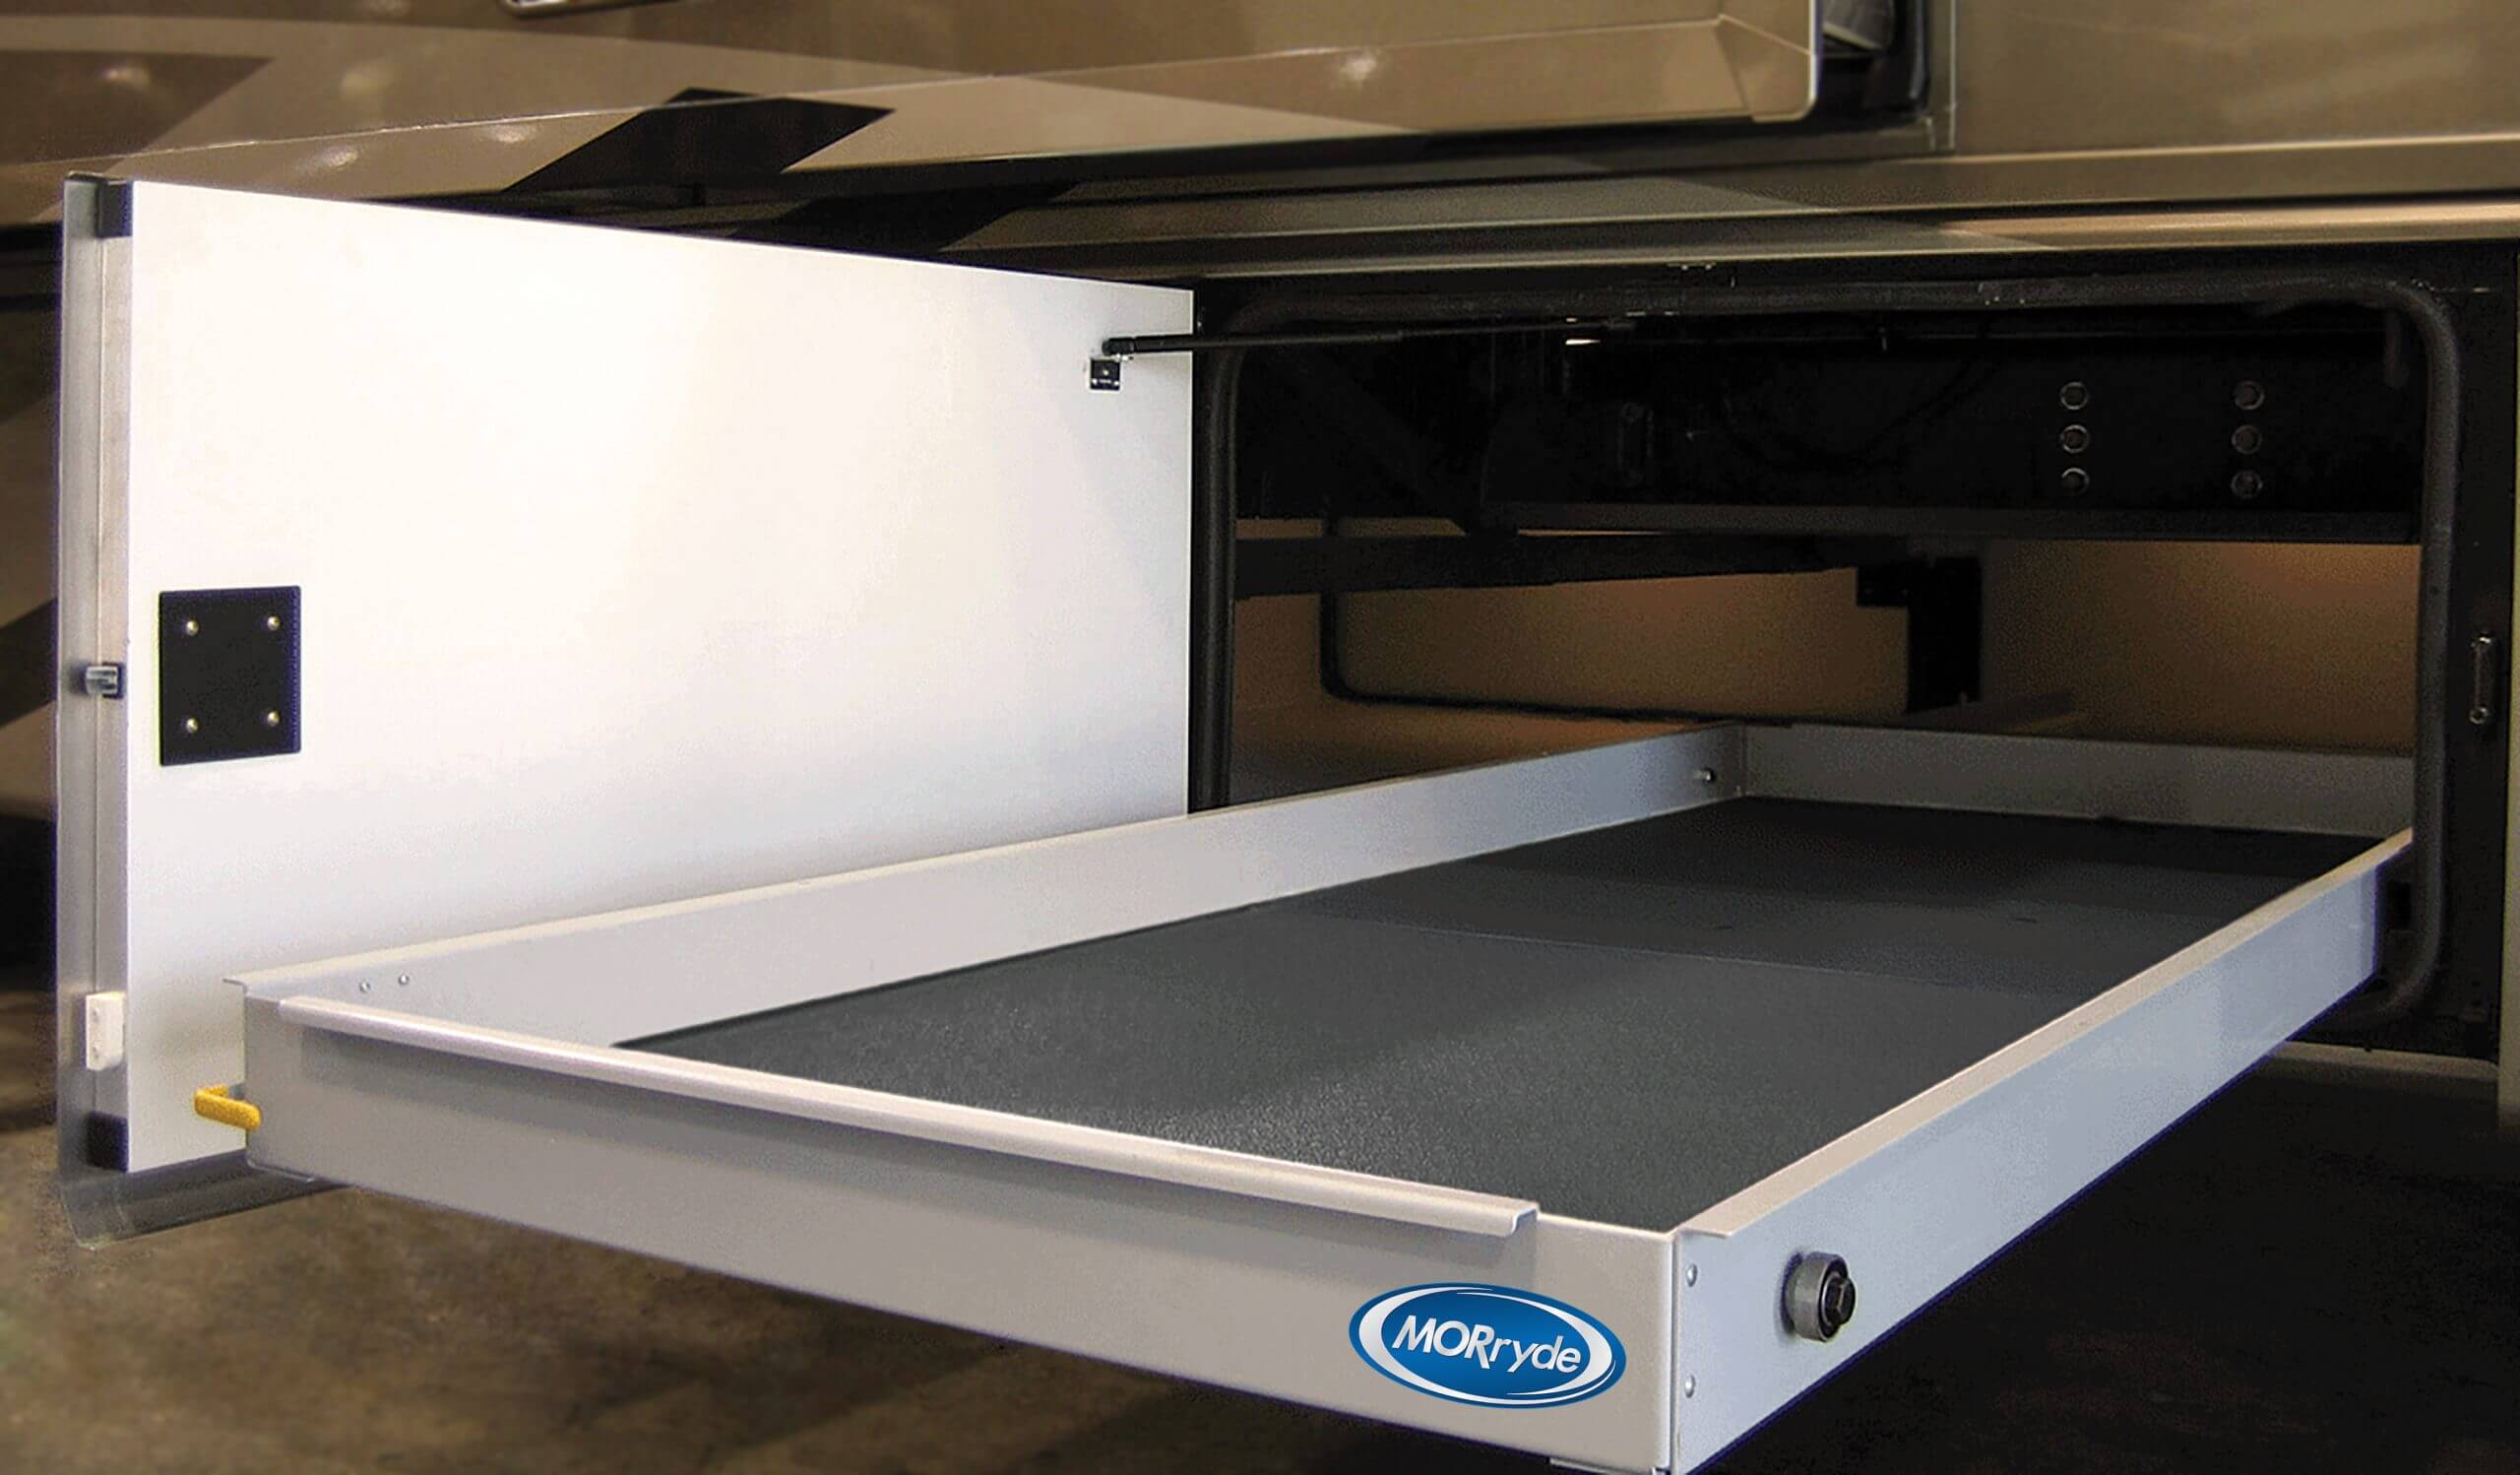 CTG60-2660W MORryde Fully Assembled, 60% Extension, 1 Way, 26"x 60" Cargo Tray w/ Carpet - IN STOCK